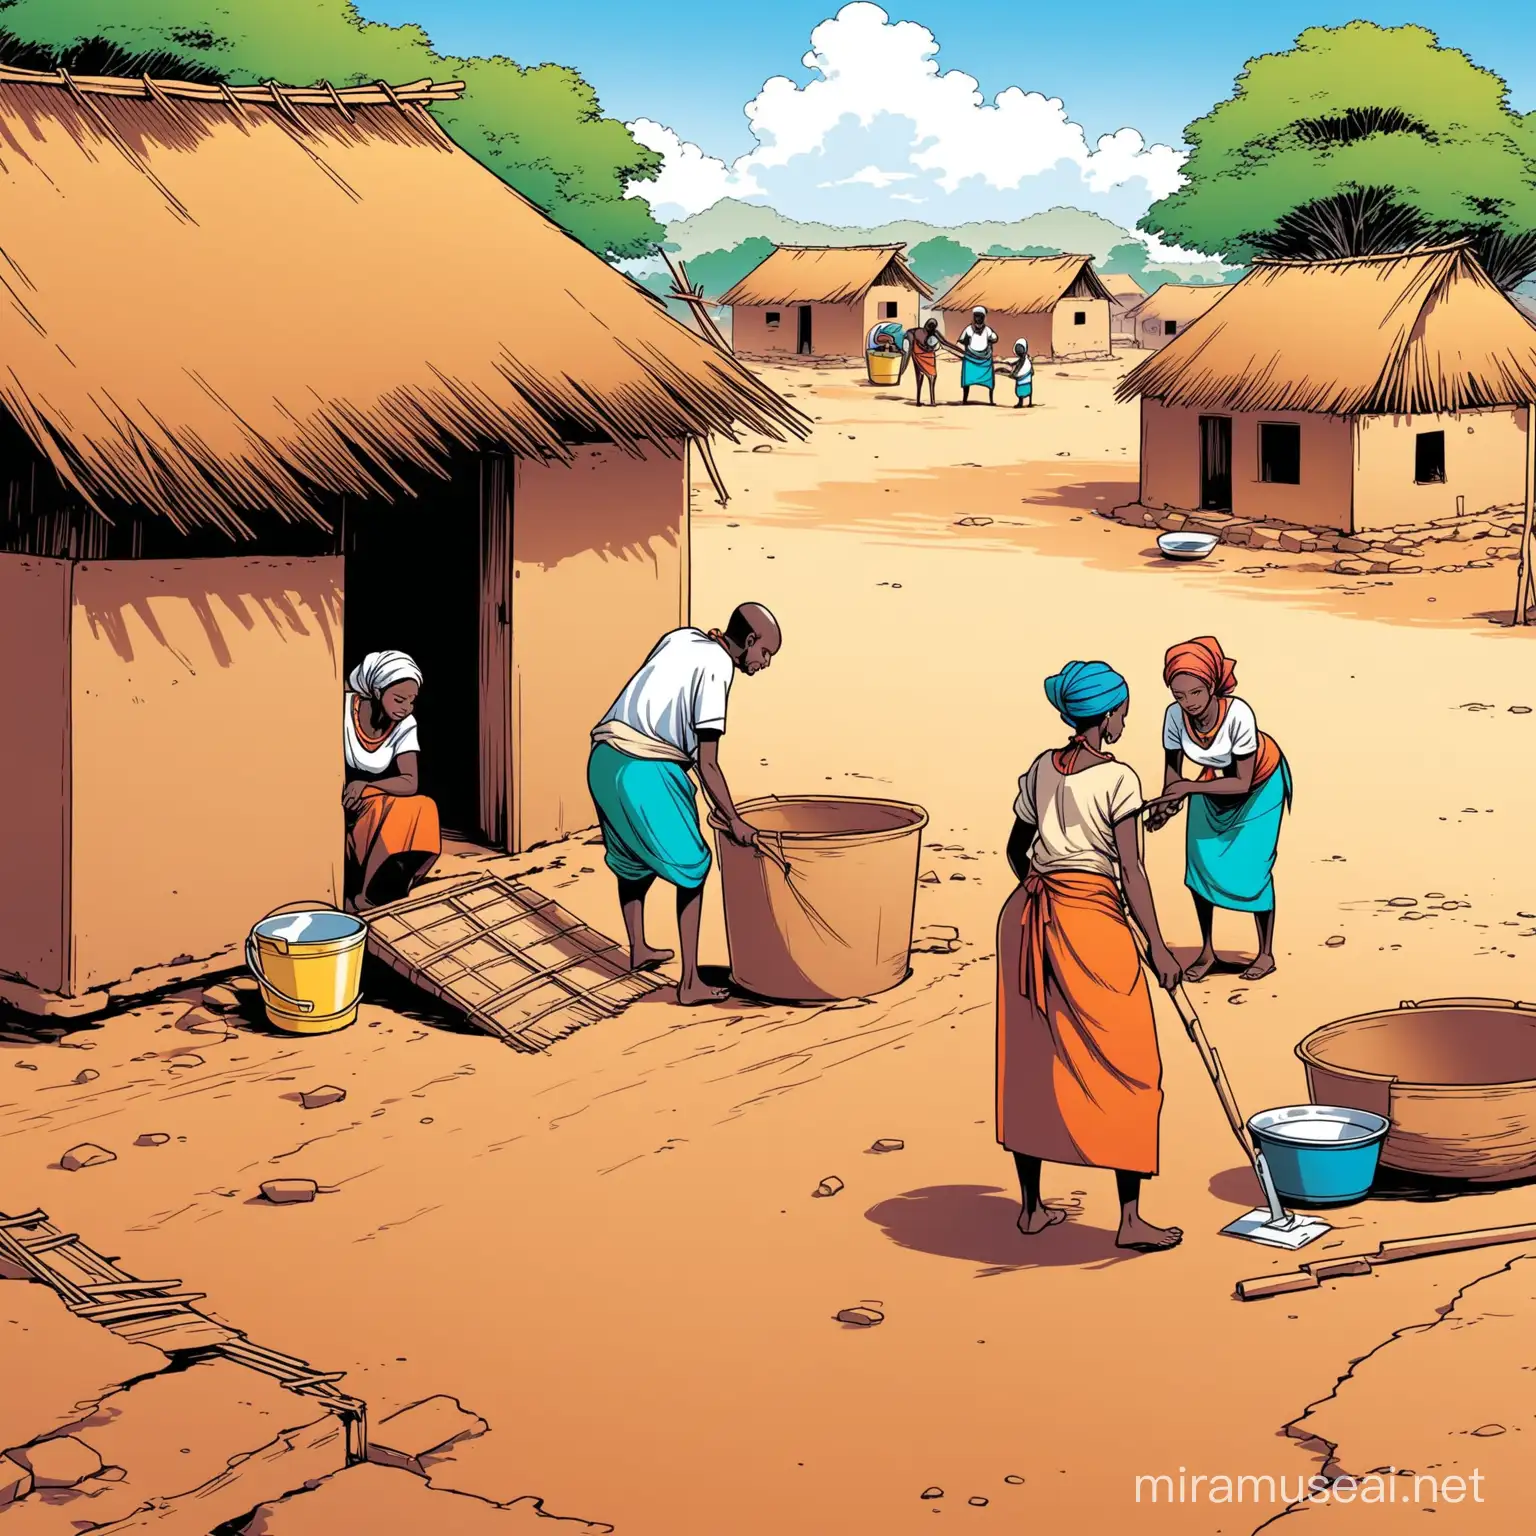 womwn and man fixing they house in a village africa cartoon 